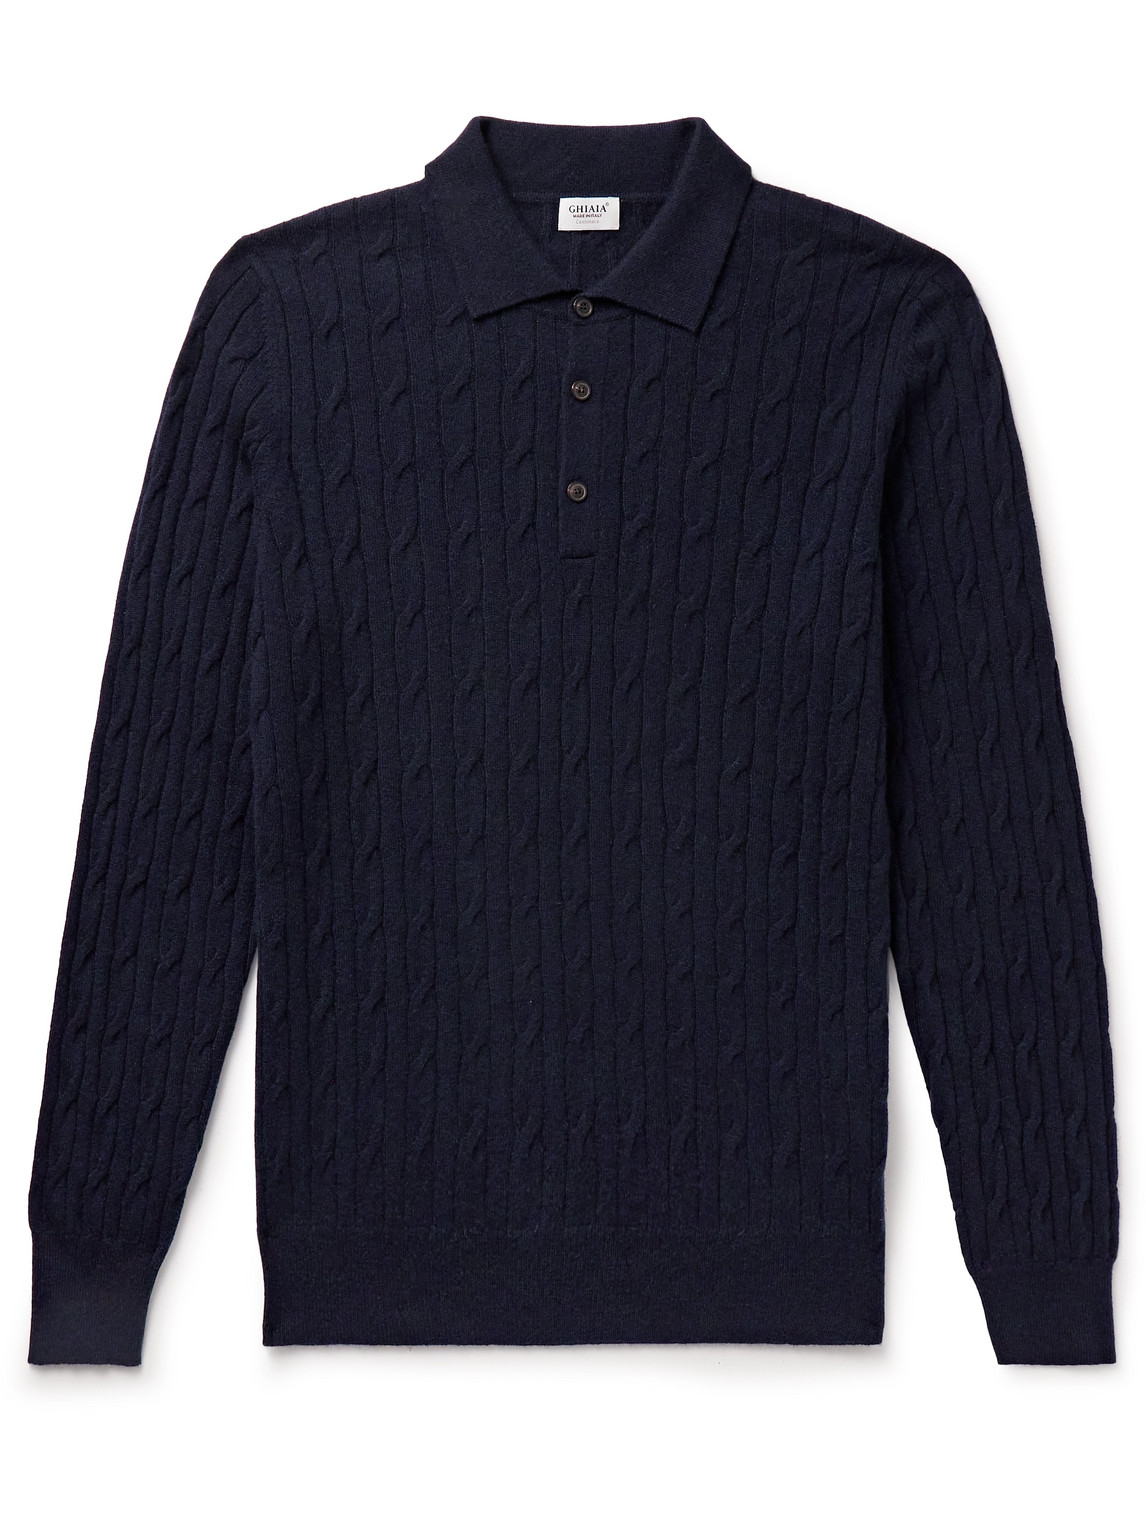 GHIAIA CASHMERE CABLE-KNIT CASHMERE POLO SHIRT